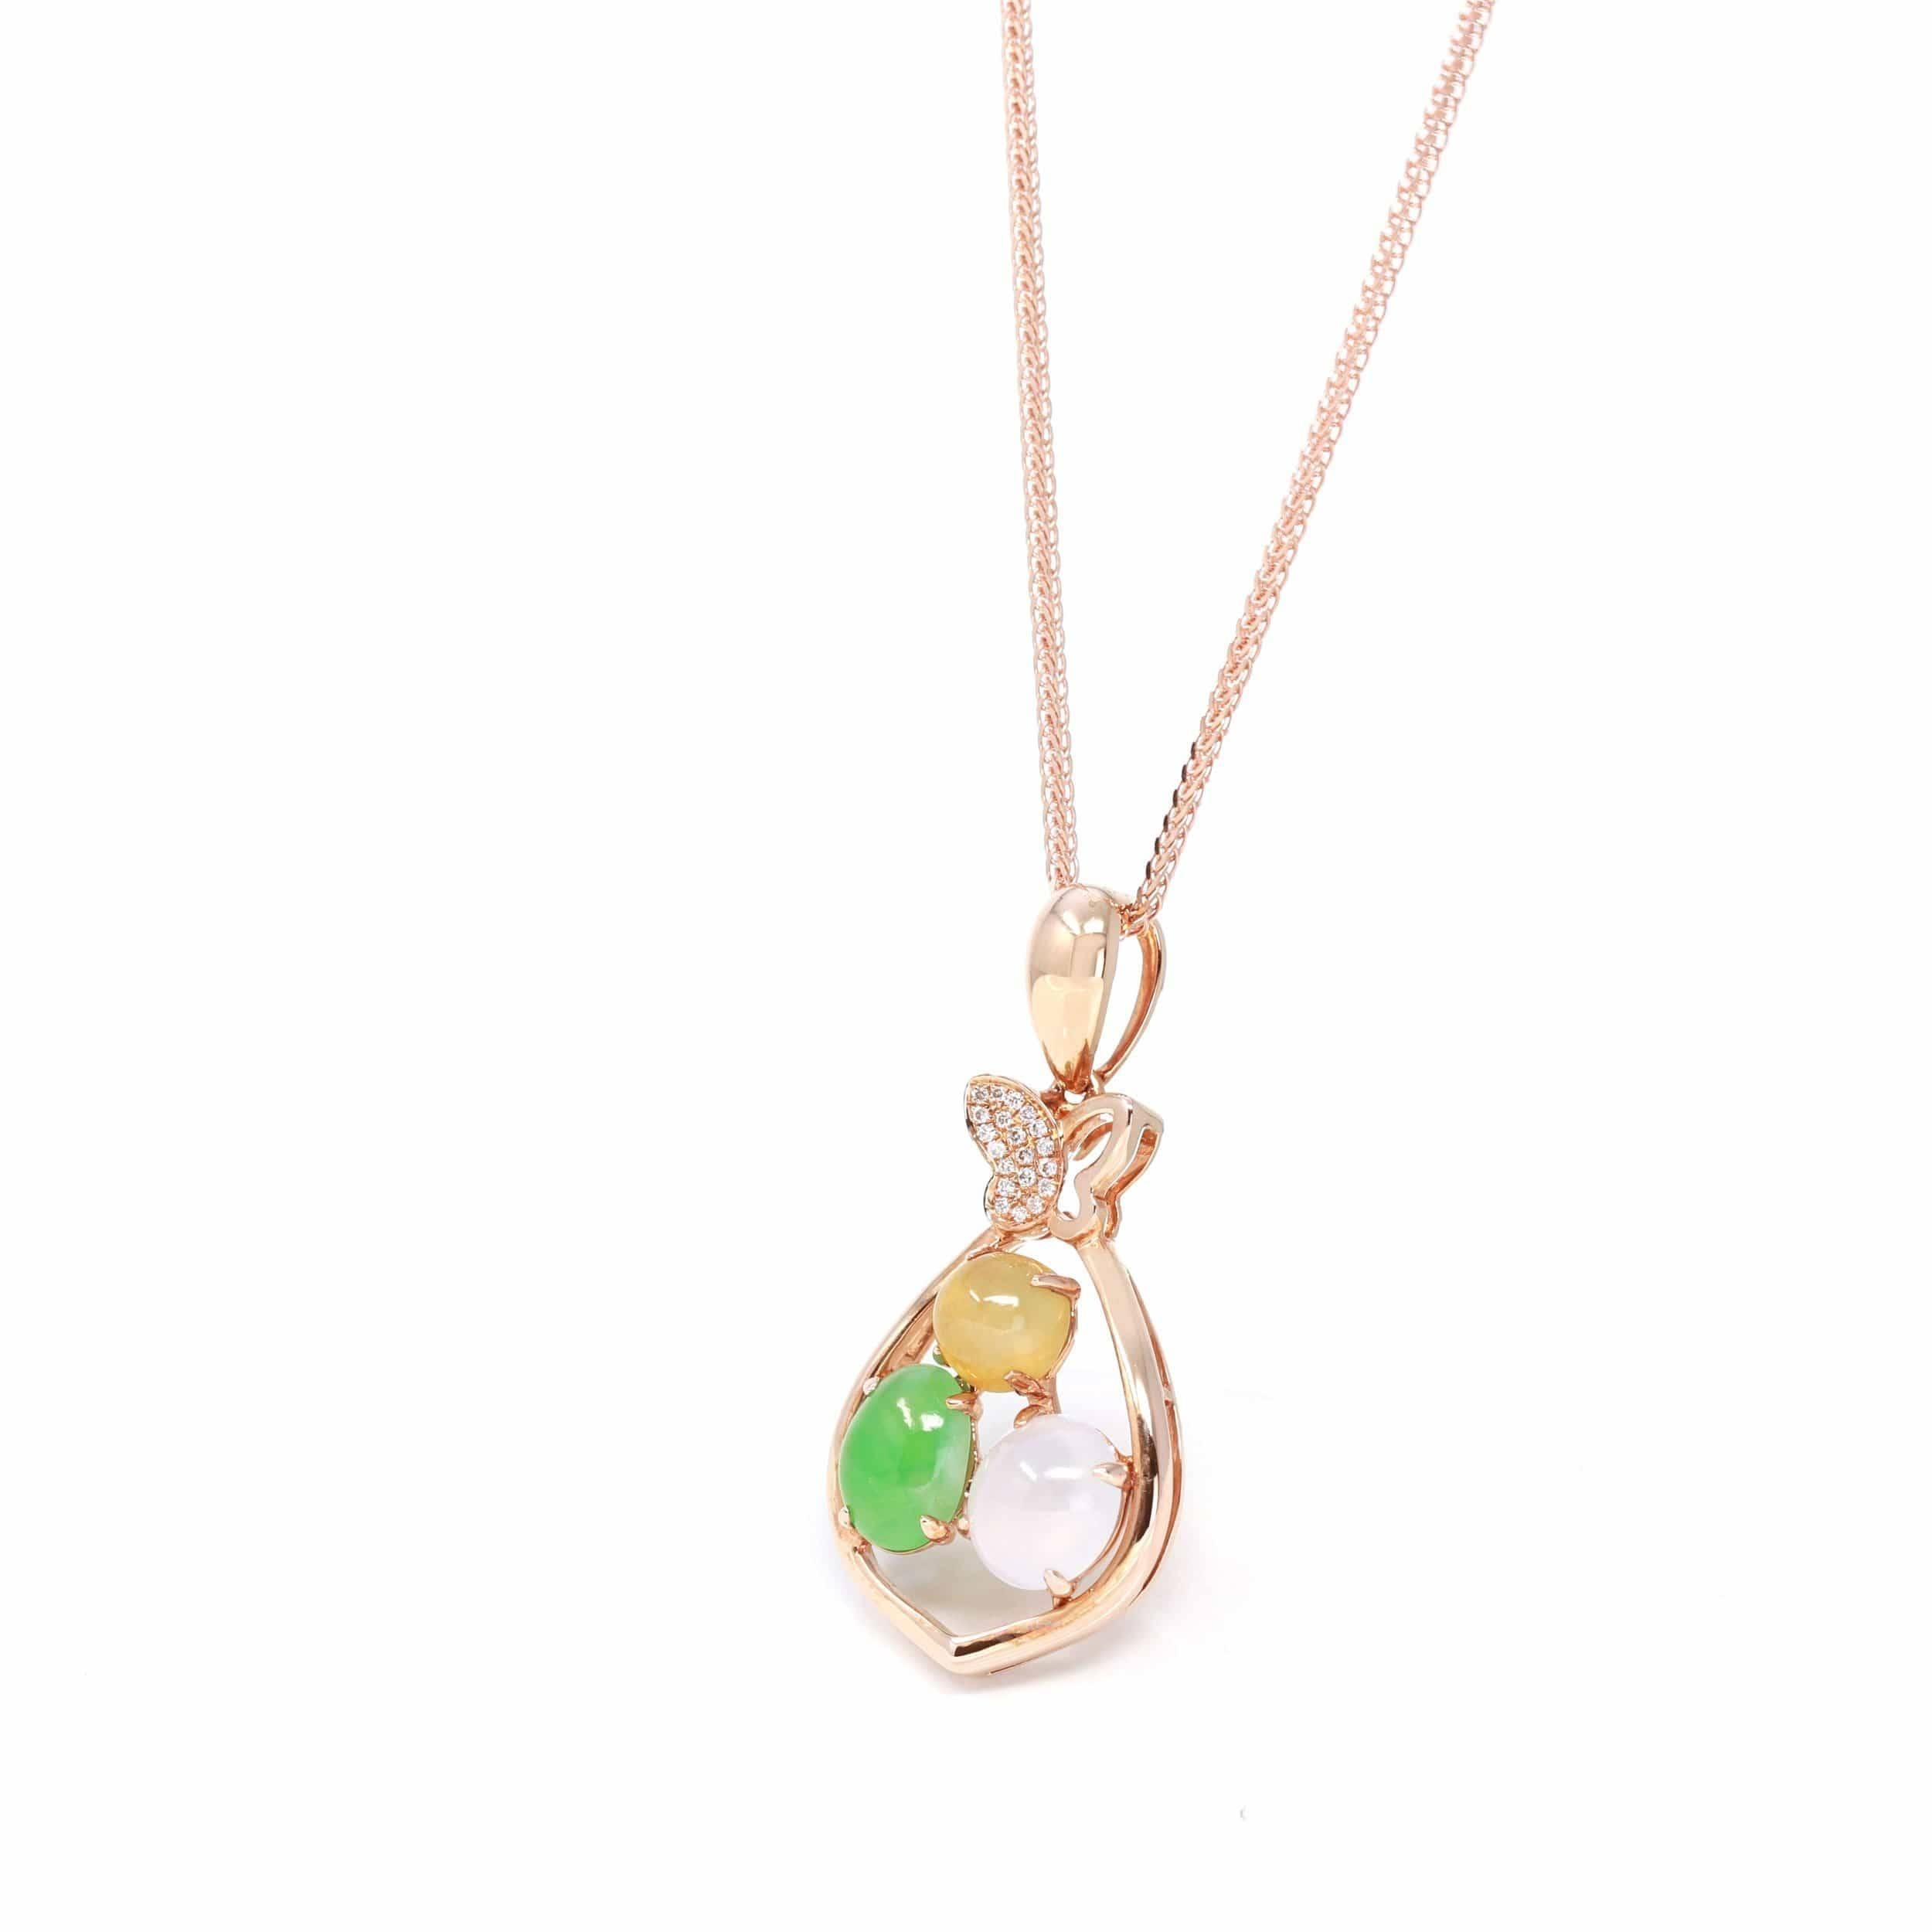 Design Concept: --- This necklace puts a modern twist on a traditional symbol that represents wealth accumulation, good luck, and prosperity. With the rare and gorgeous ice/multi-color jadeite from Burma. This necklace combines these perfectly